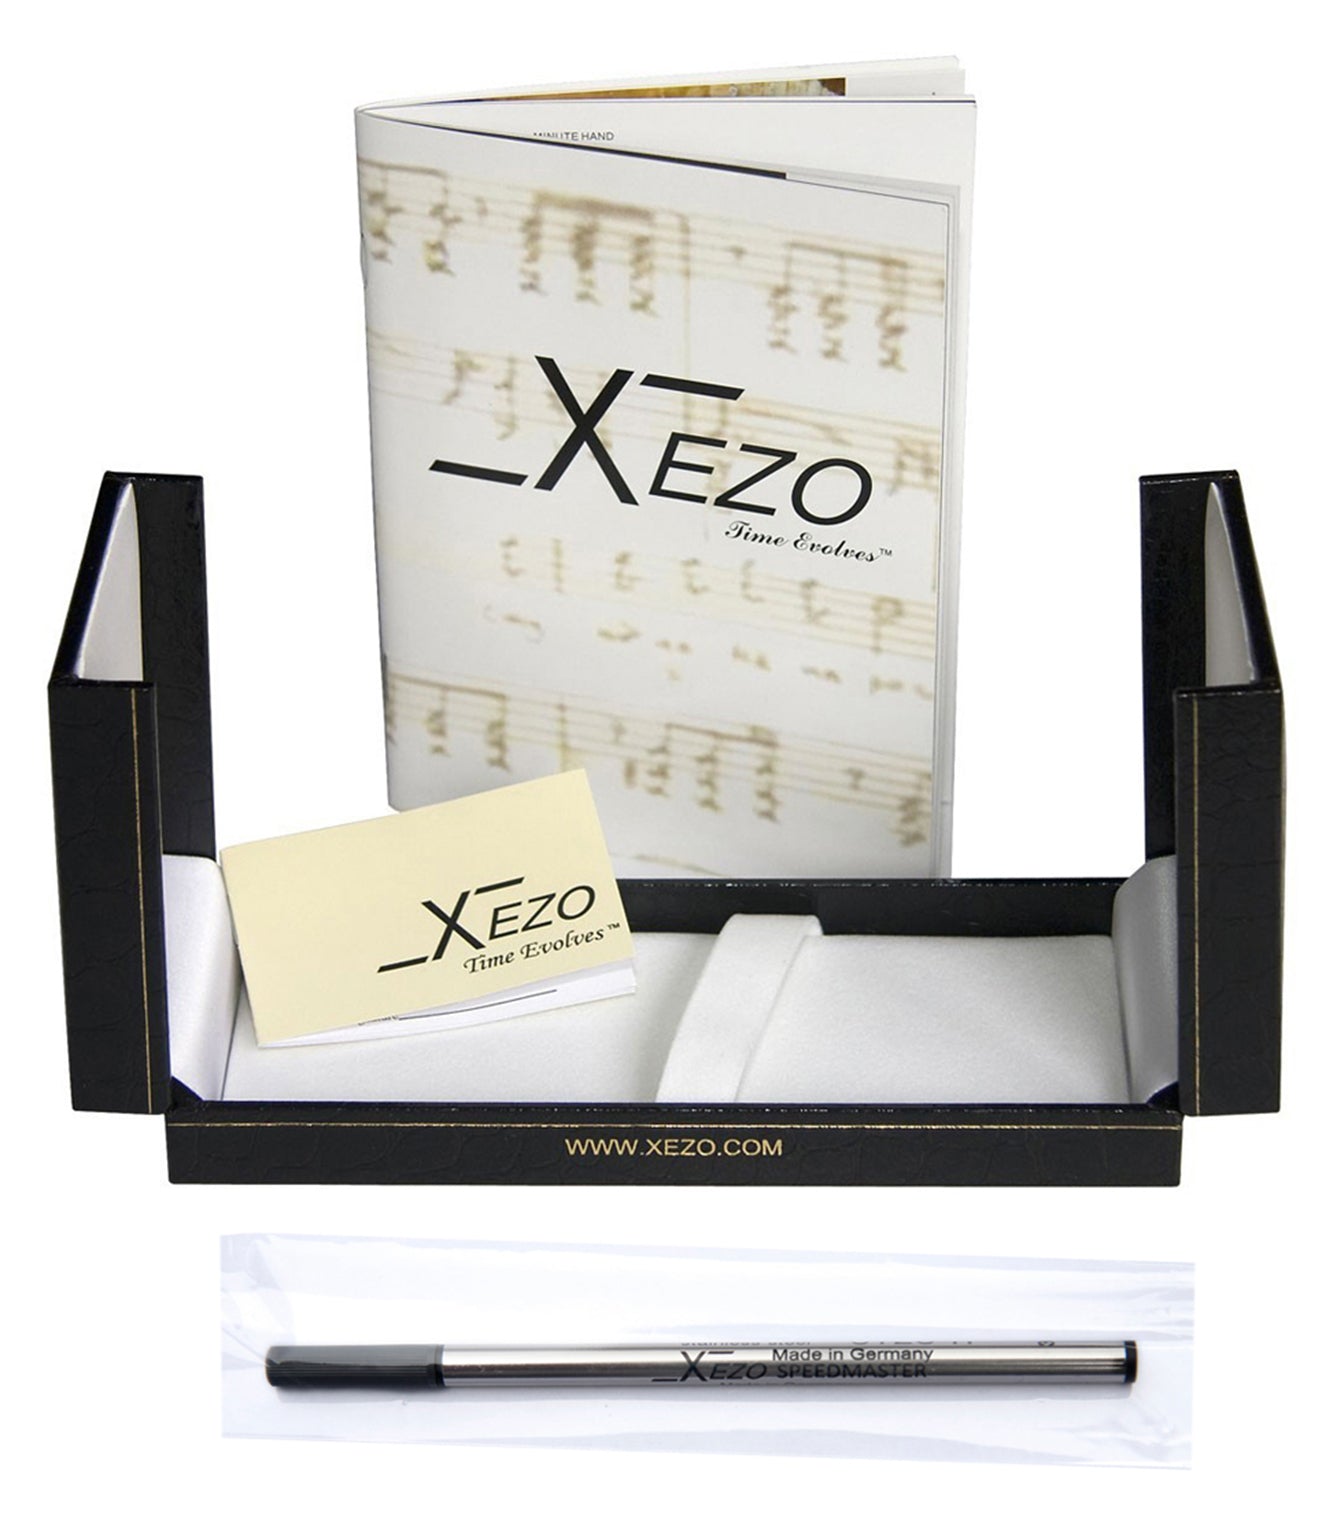 Xezo - Black gift box, certificate, manual, and gel ink cartridge of the Maestro Sea Shell RPG-1 rollerball pen